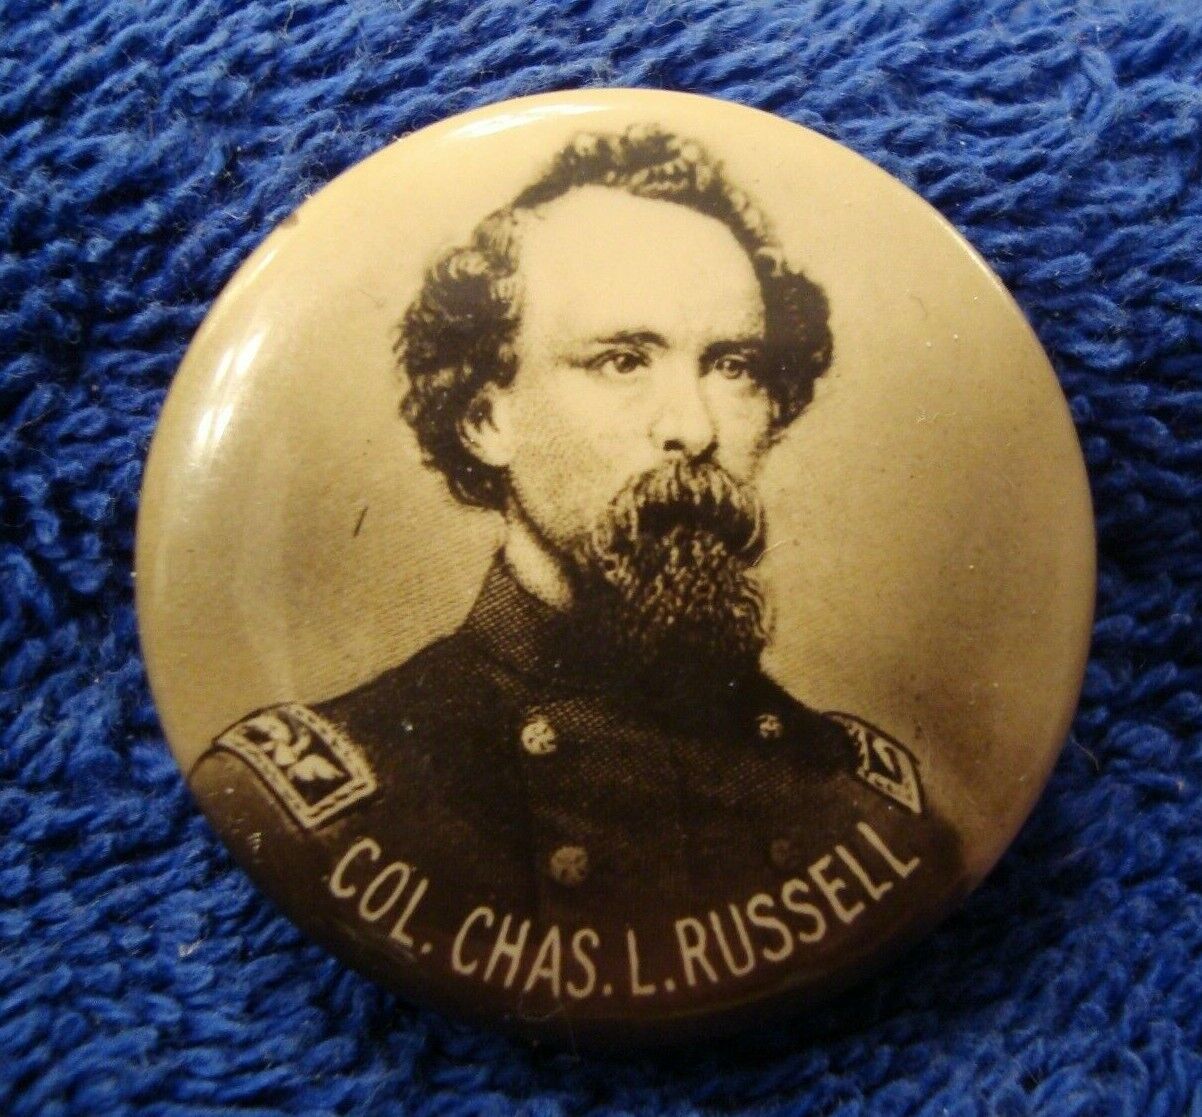 COL. CHAS. L. RUSSELL, 10th CONNECTICUT INF. KILLED IN ACTION 1862 PHOTO BUTTON